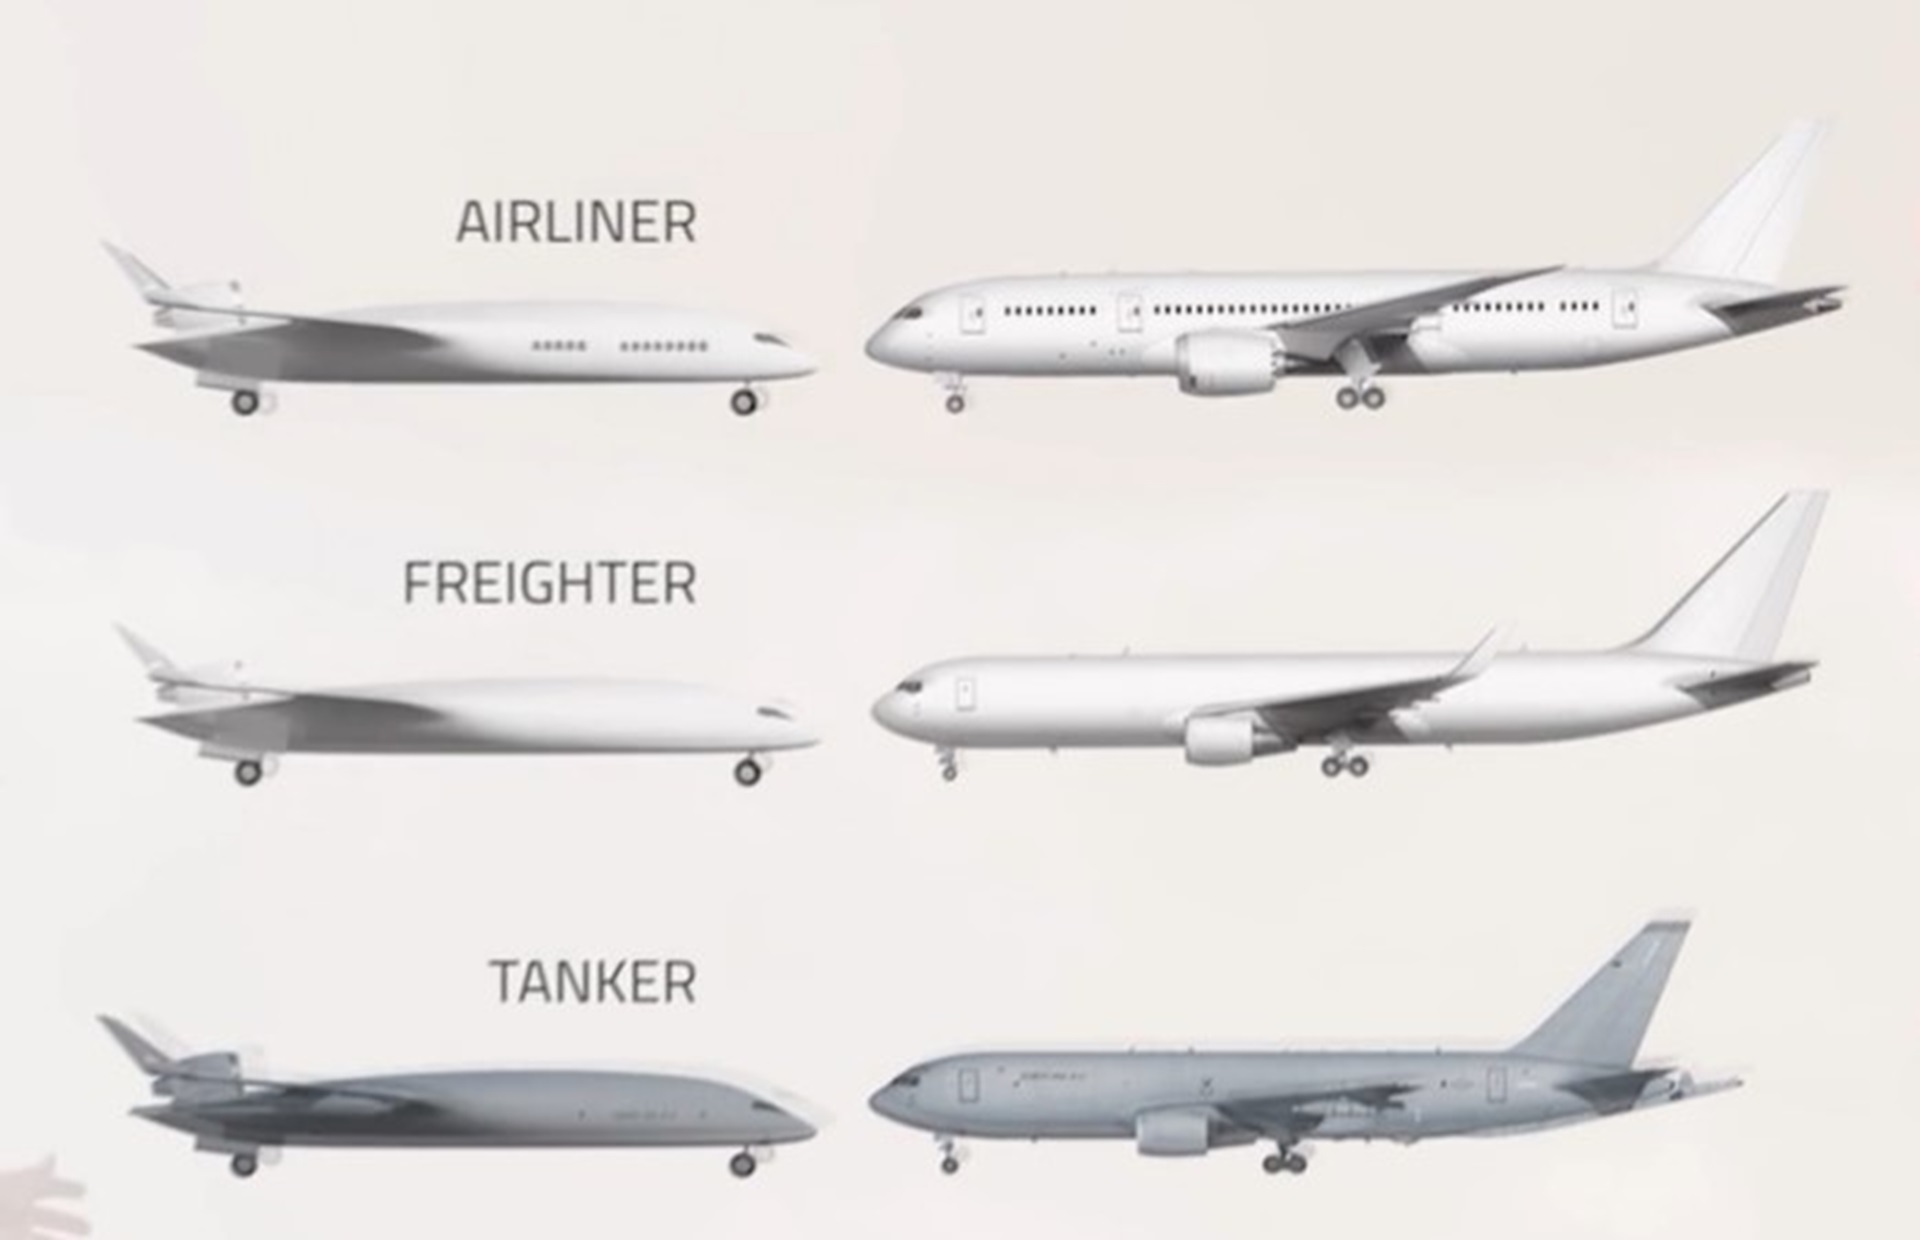 Variants for passenger, cargo, and fuel tanker planes in the works